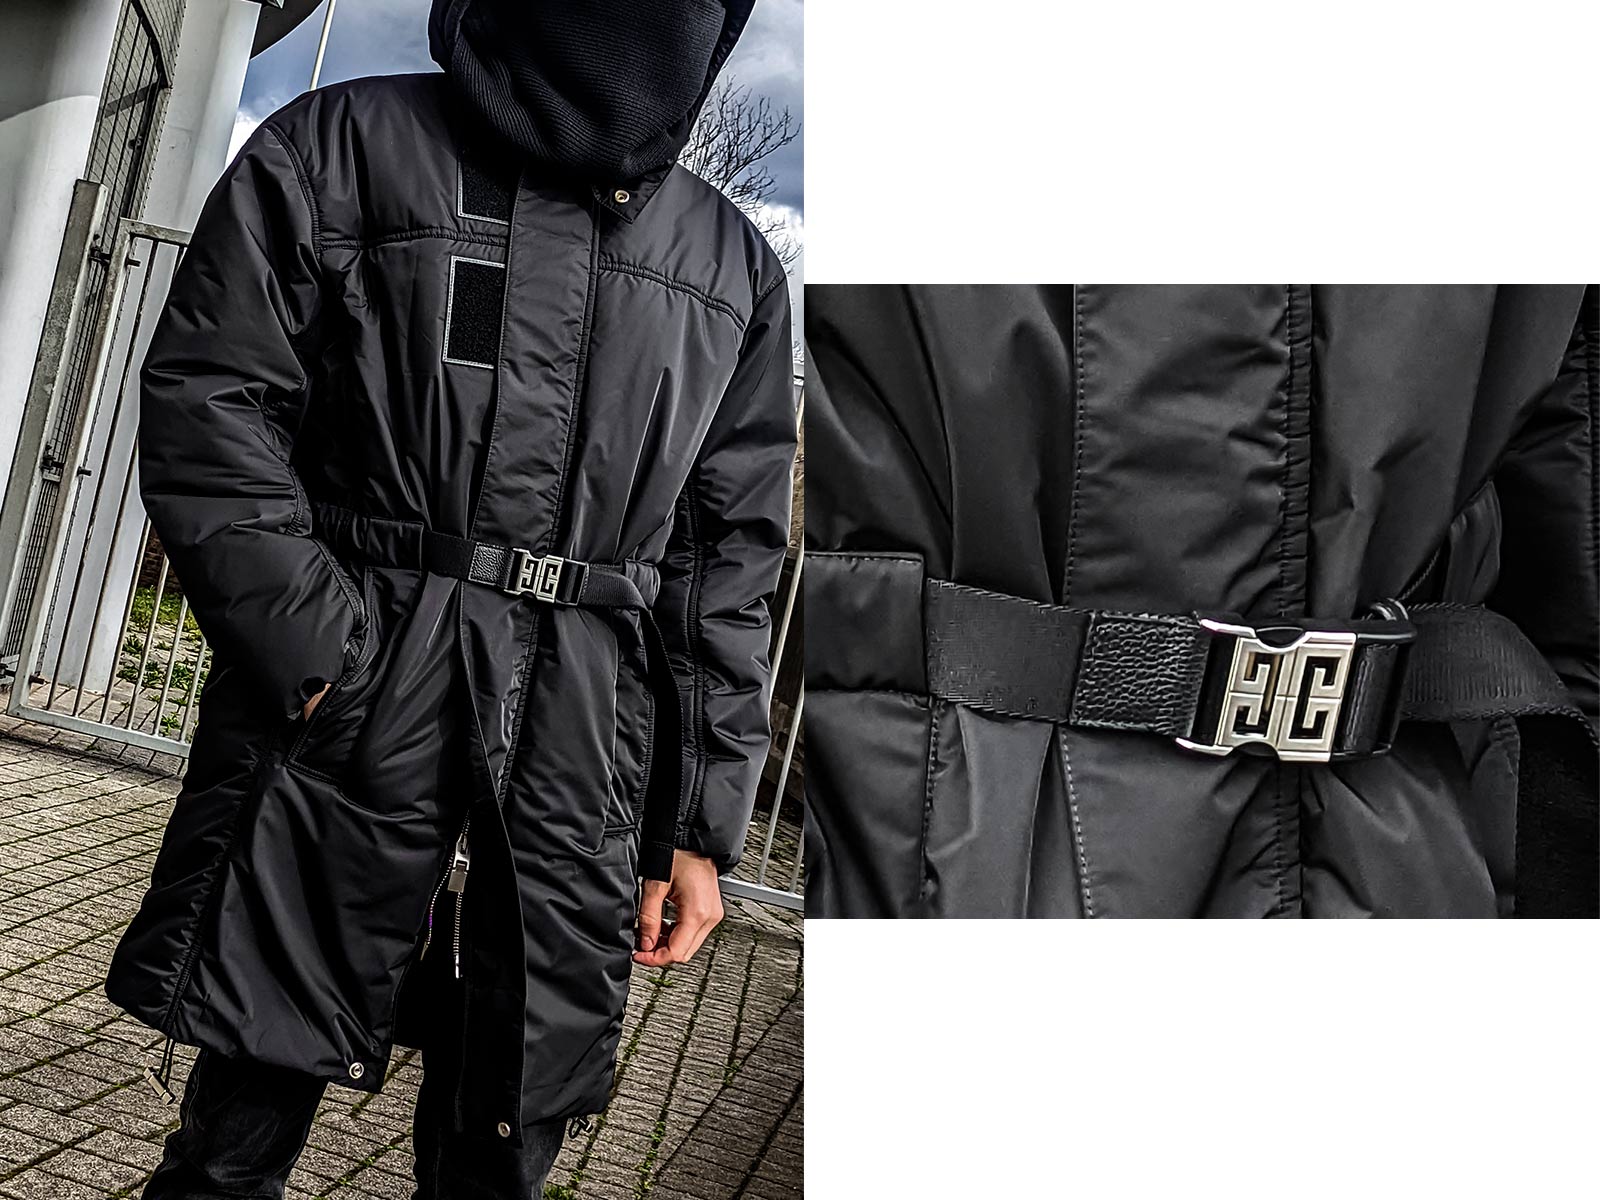 Givenchy Black Parka with Metallic Details